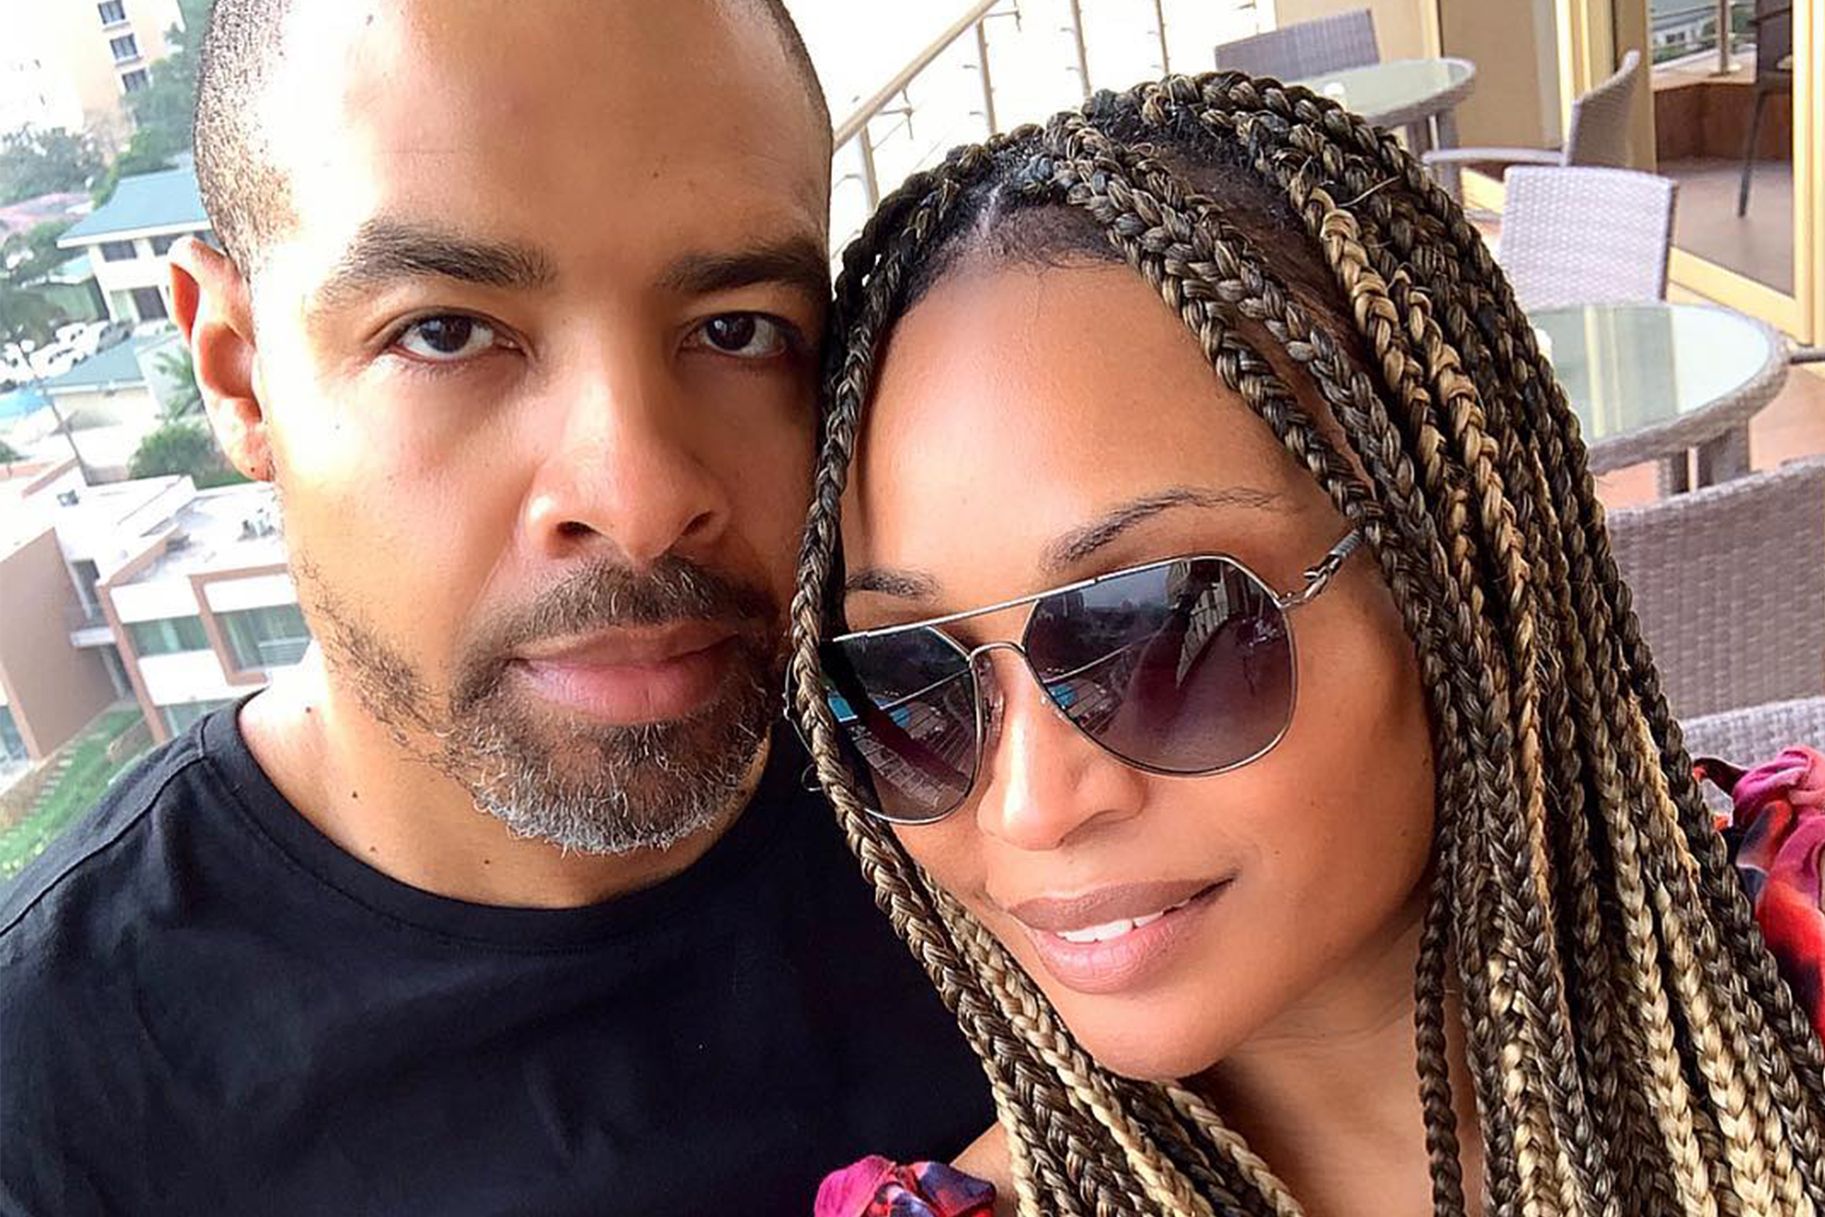 Cynthia Bailey And Eva Marcille Look Amazing With Their Husbands On Vacay - Check Out The Couples Together